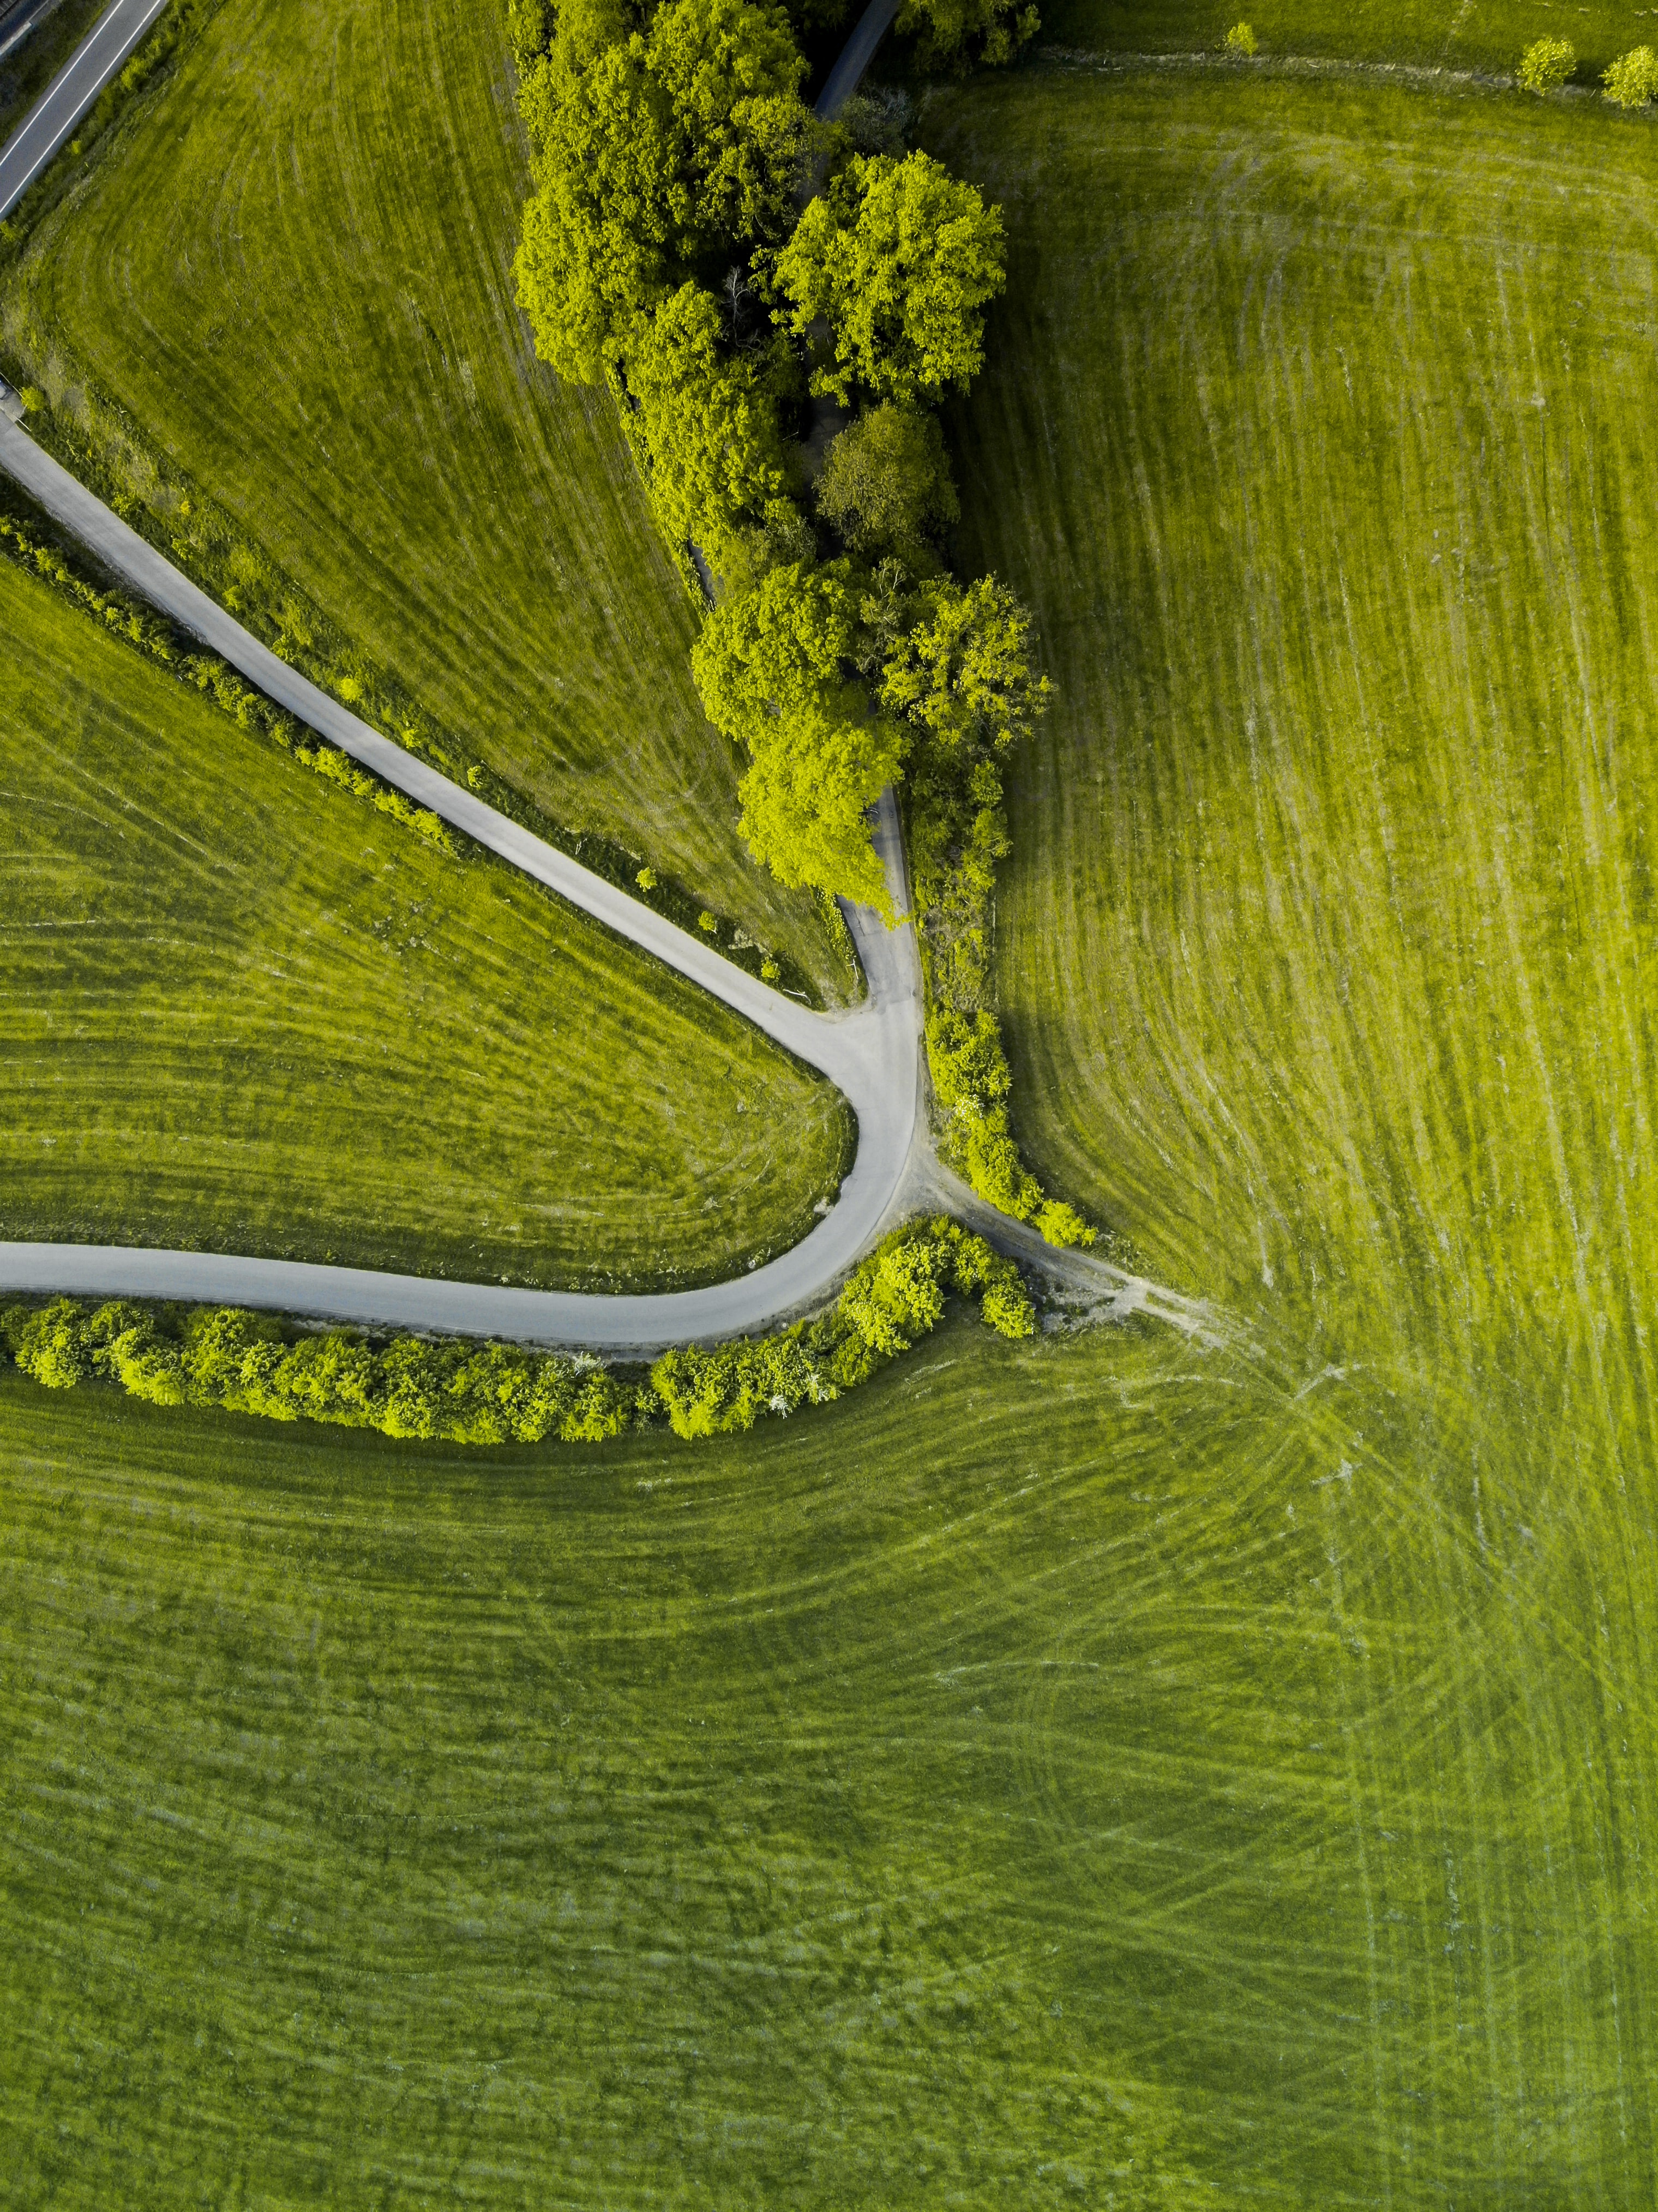 view from above, nature, trees, grass, road, winding, sinuous iphone wallpaper